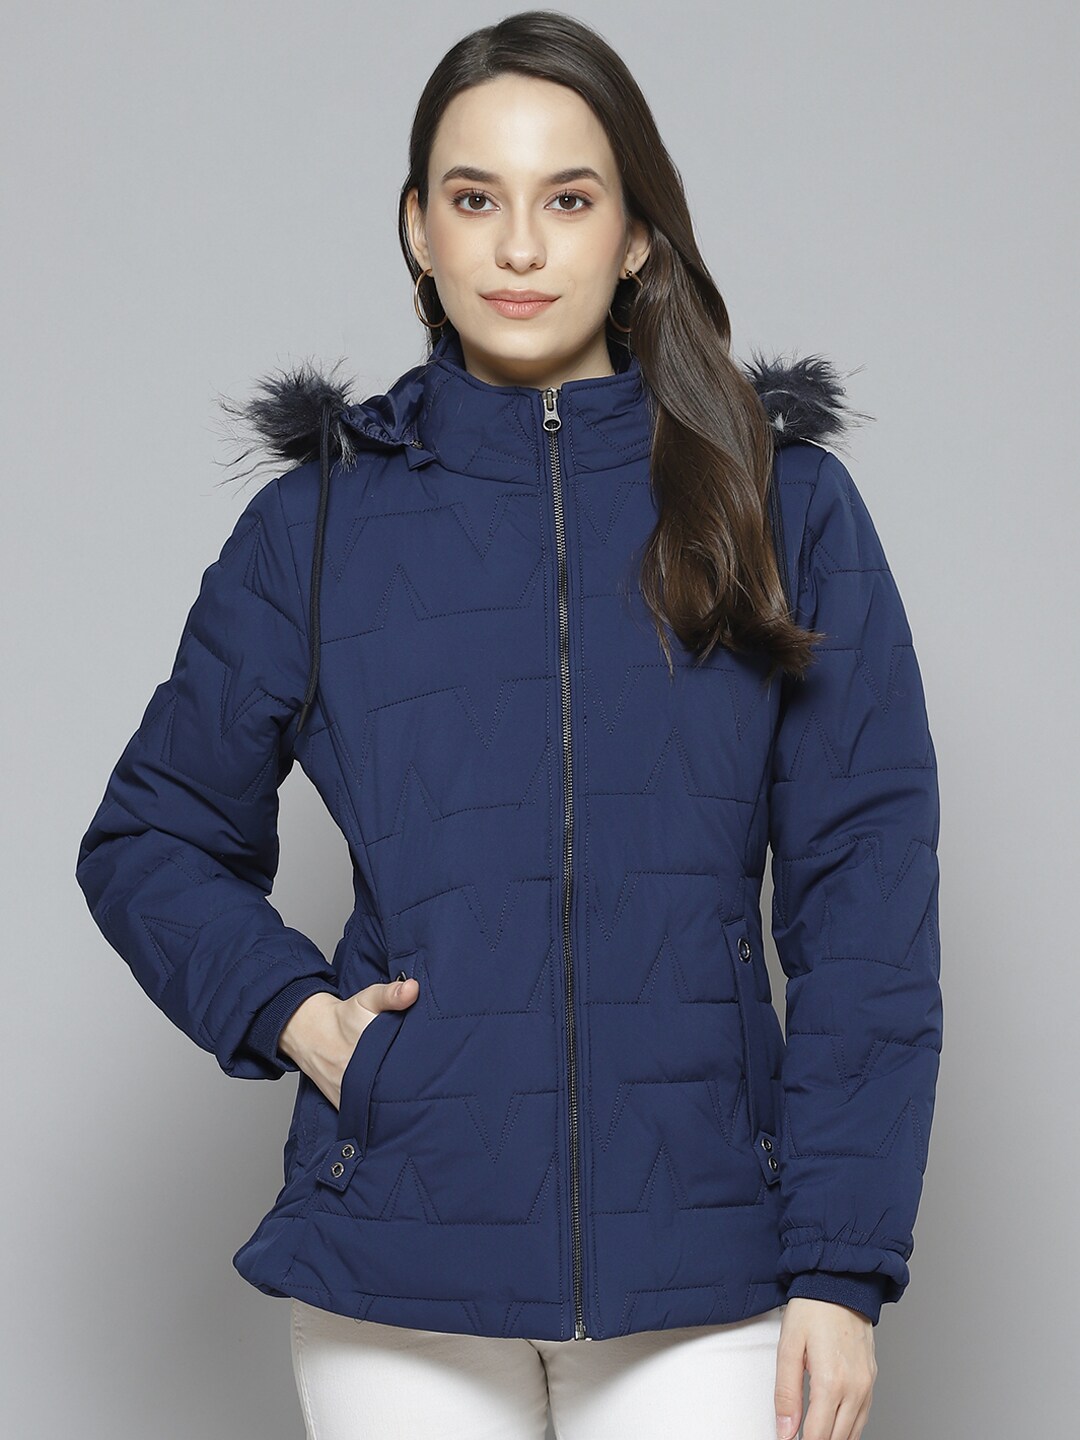 Fort Collins Women Navy Blue Solid Parka Jacket with Detachable Hood Price in India